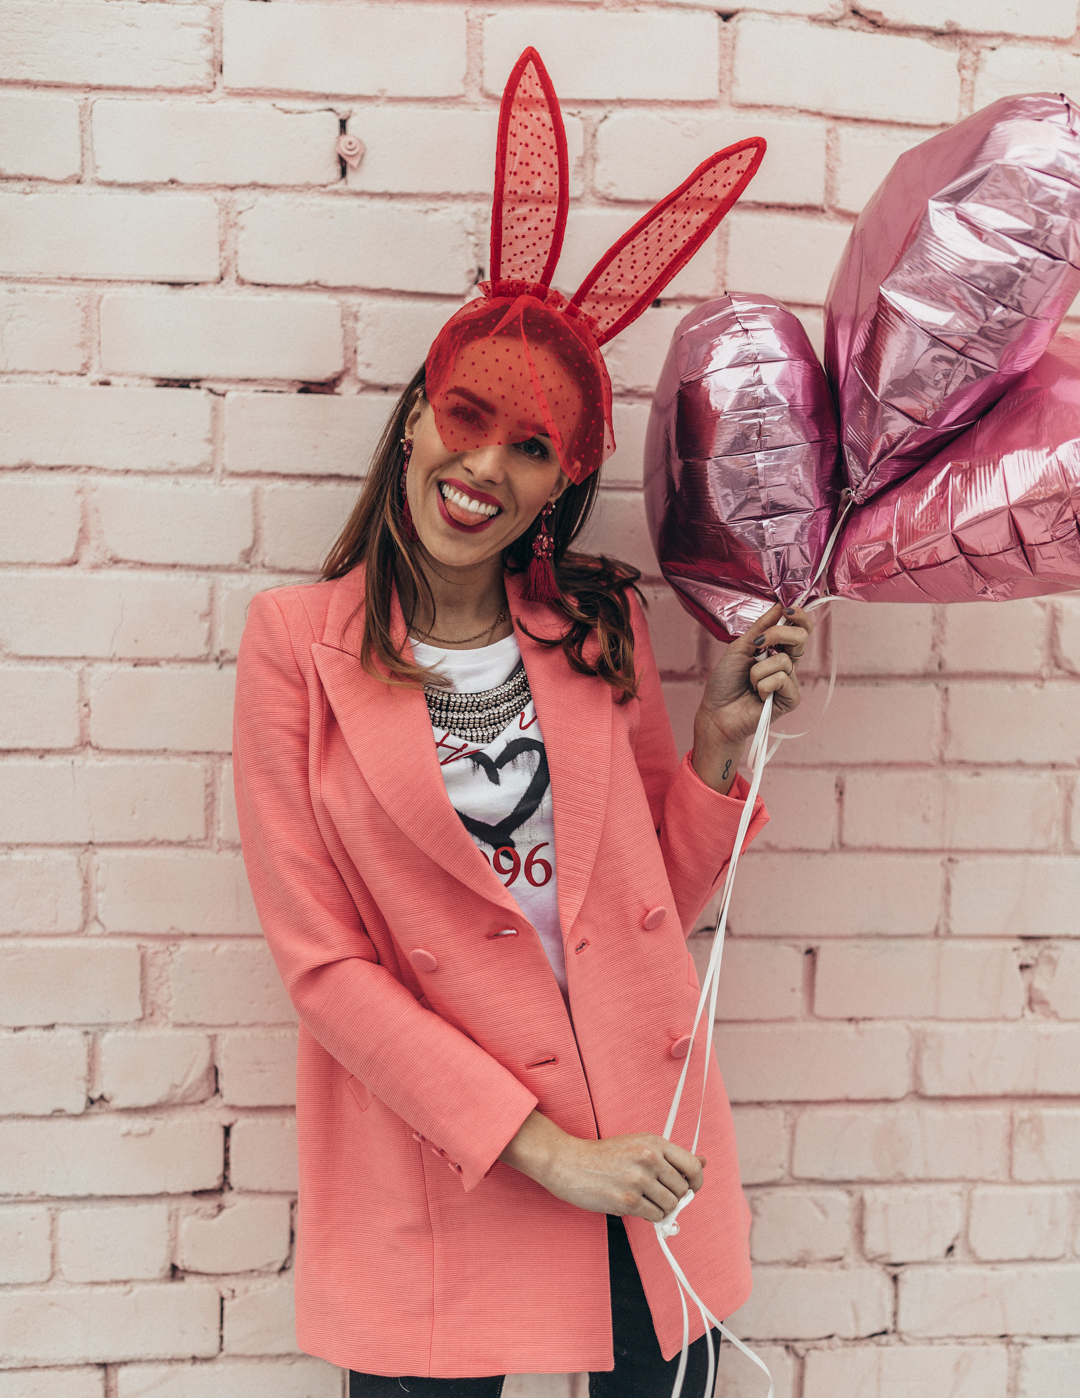 chic valentines day outfit pink blazer tshirt bunny ears lace veil balloons